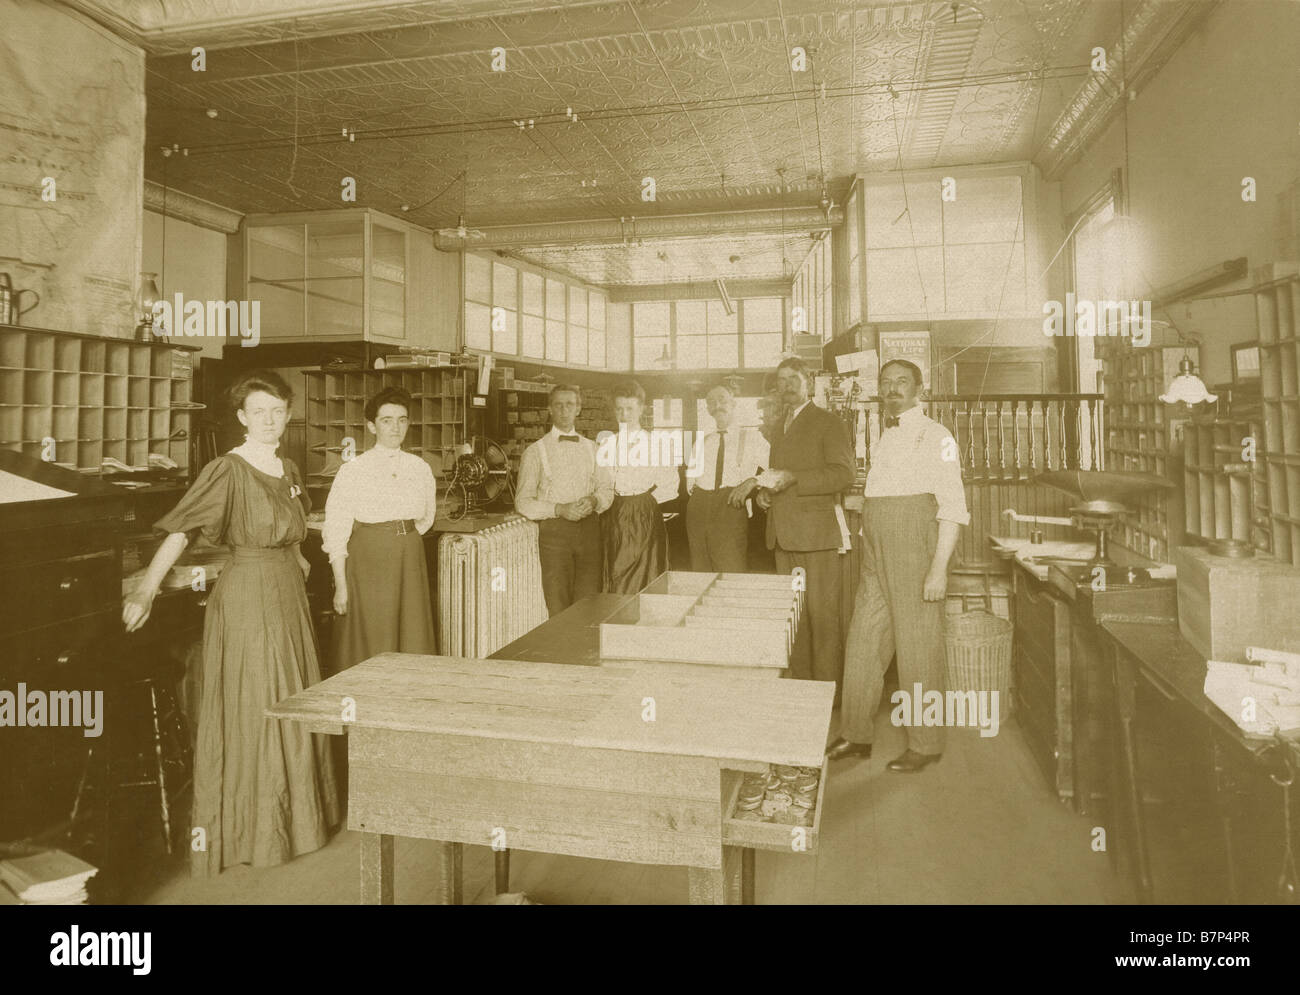 Circa 1890s photograph of an old mailroom or sorting room with the managers and employees. Stock Photo